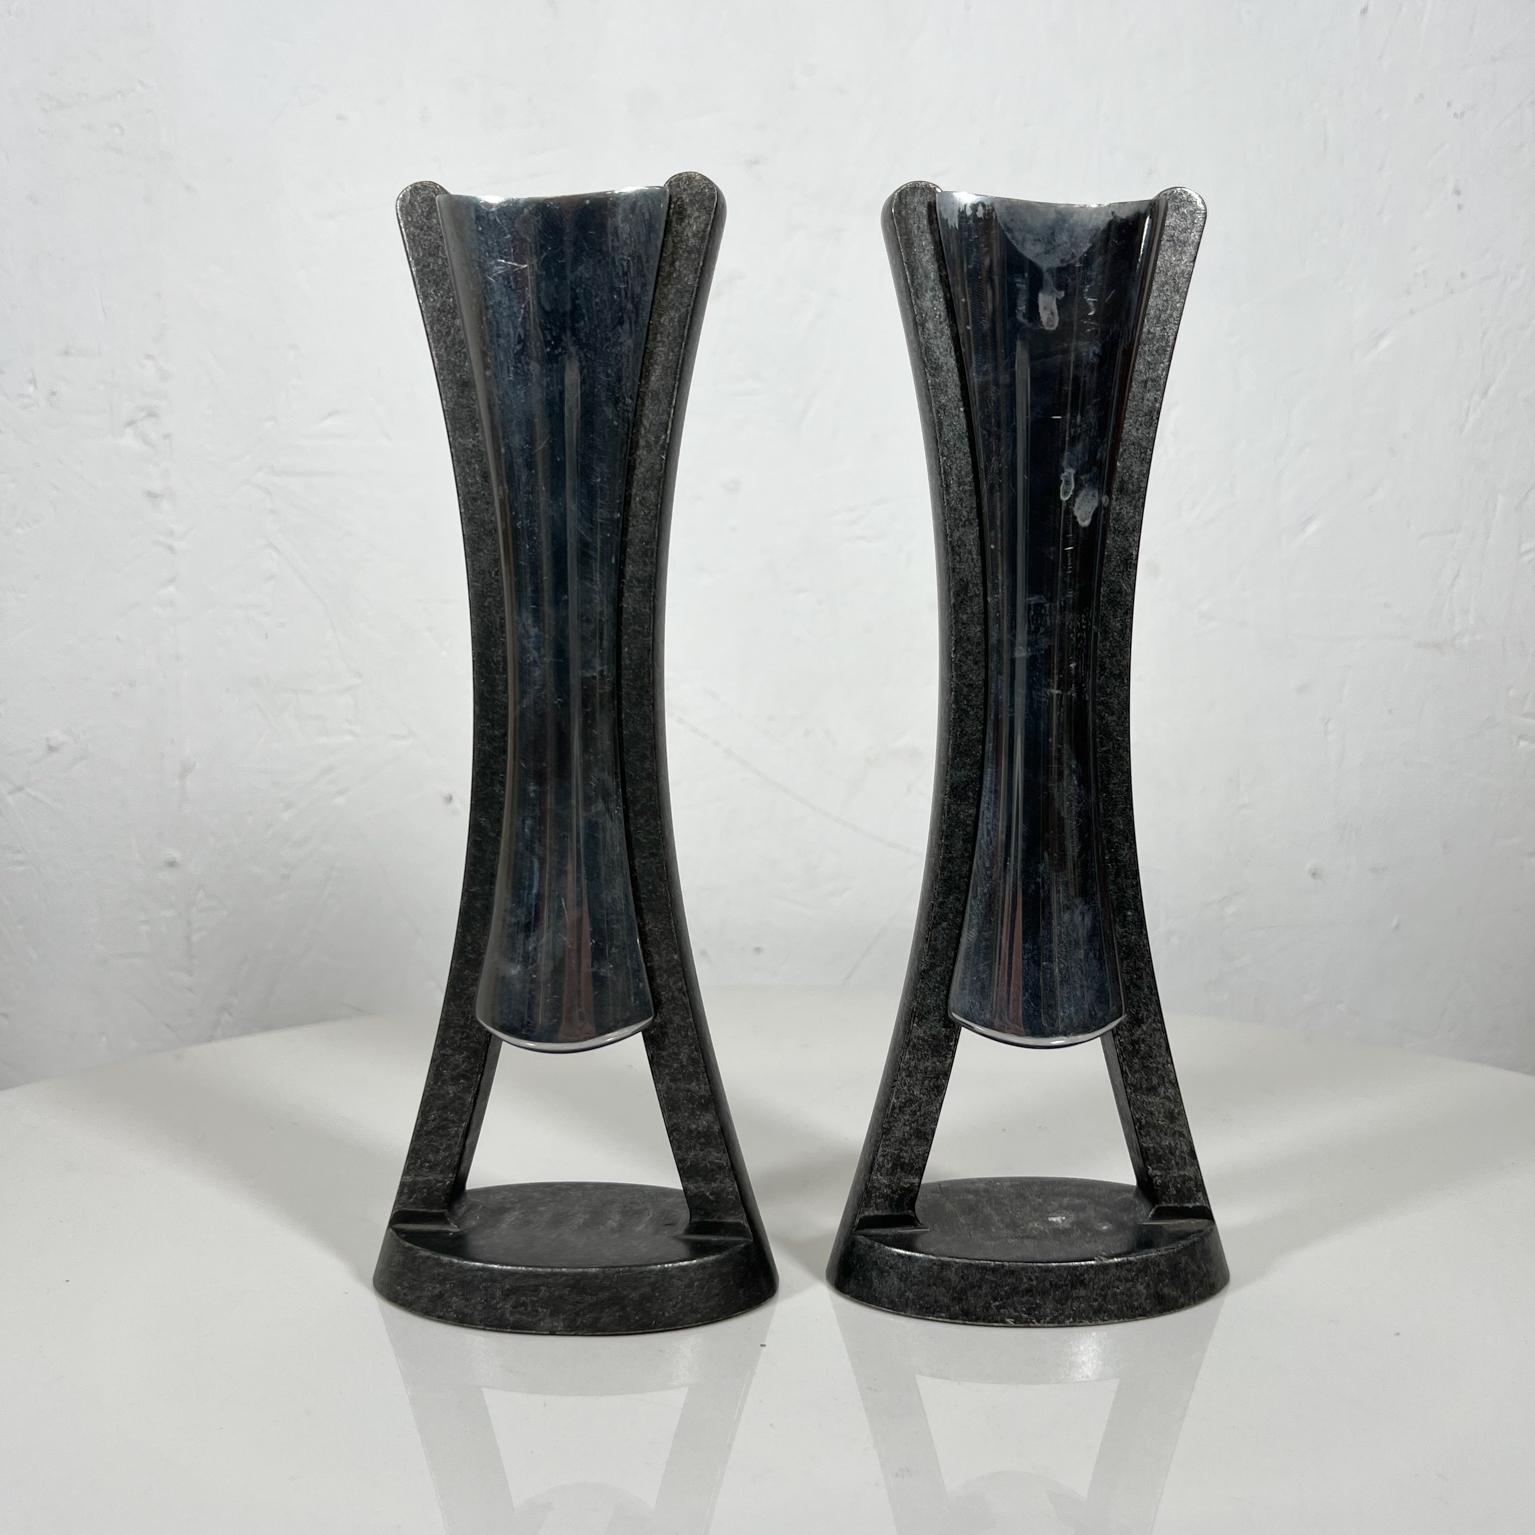 2010 Modern Vintage NAMBE sculptural candle holders by Neil Cohen
Neil Cohen designer
Measures: 9.5 tall x 3.5 wide x 2.25 depth
Aluminum and steel.
Signed on bottom mt0341 2010
Vintage unrestored condition with patina.
Refer to images